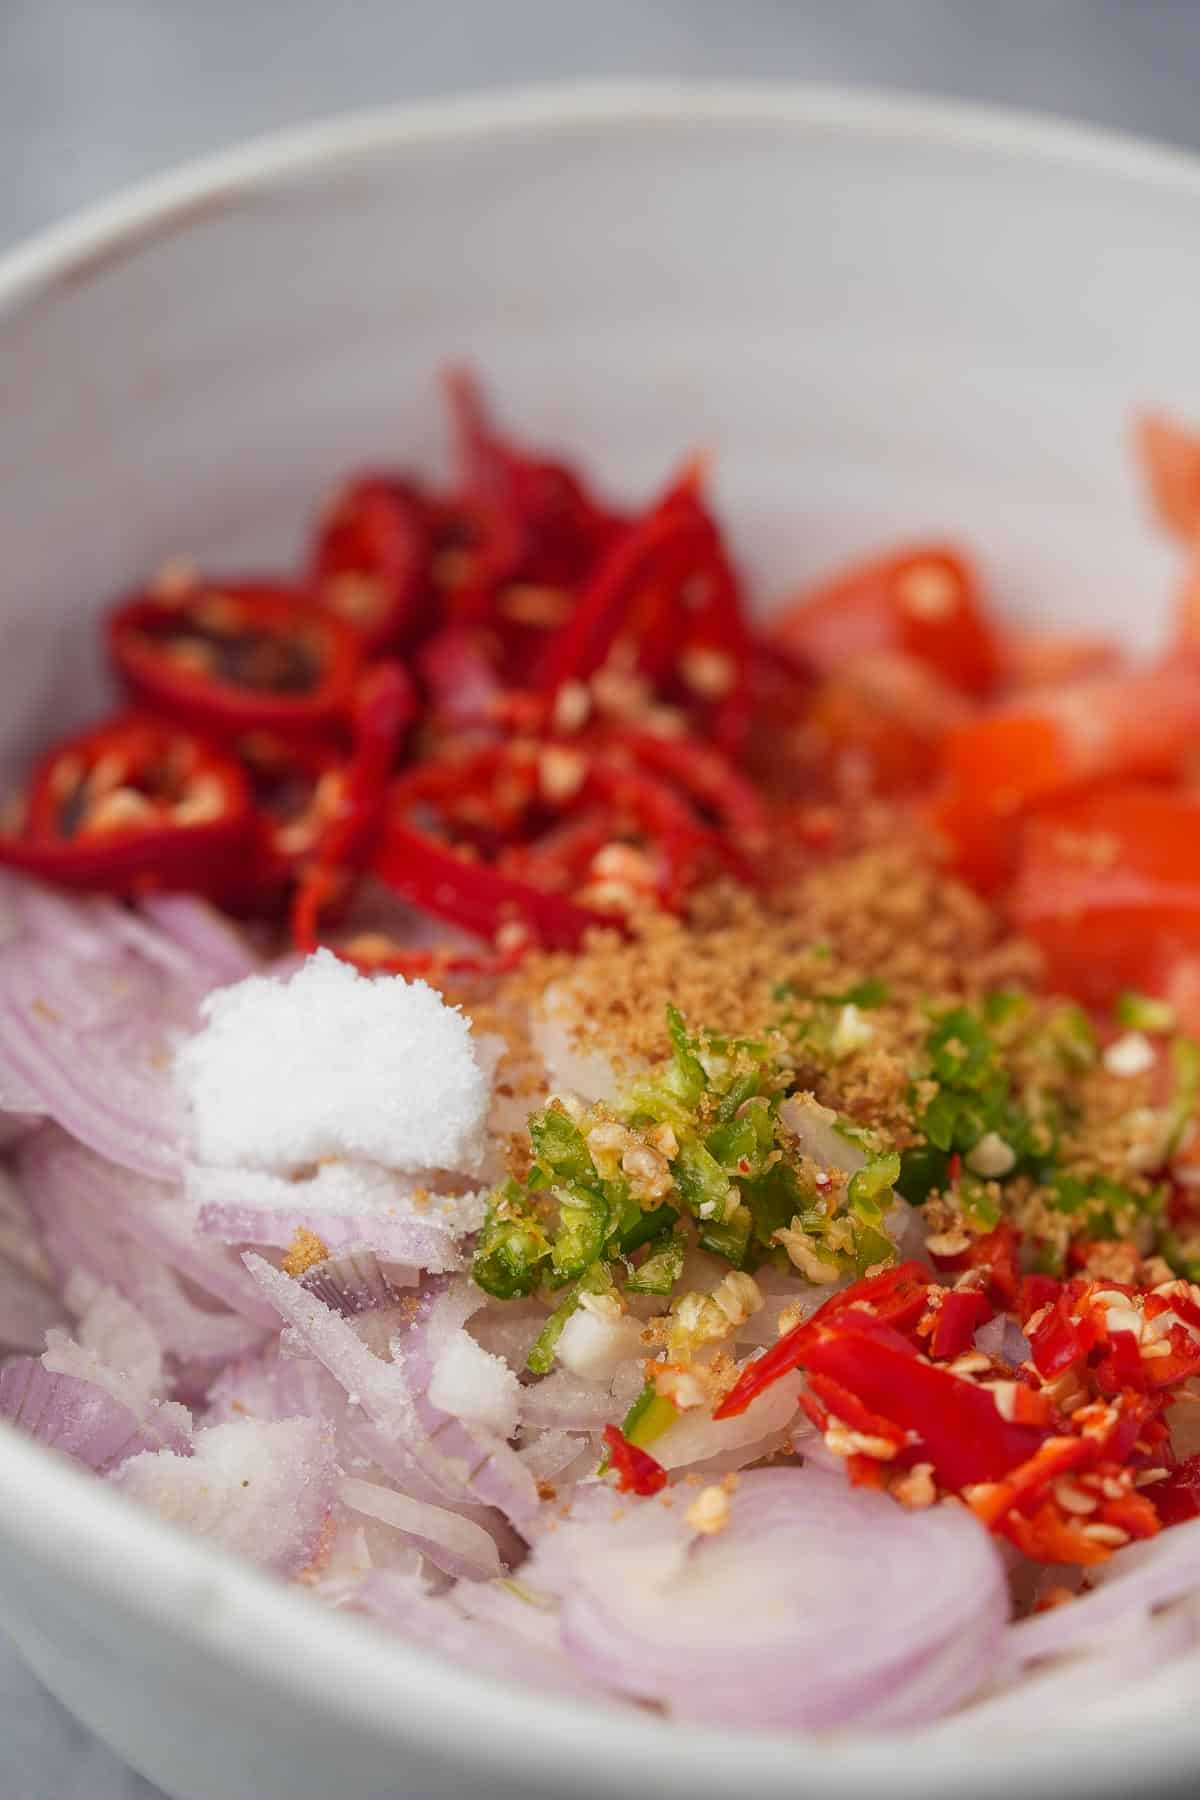 A bowl with shallots, peppers, and other ingredients.